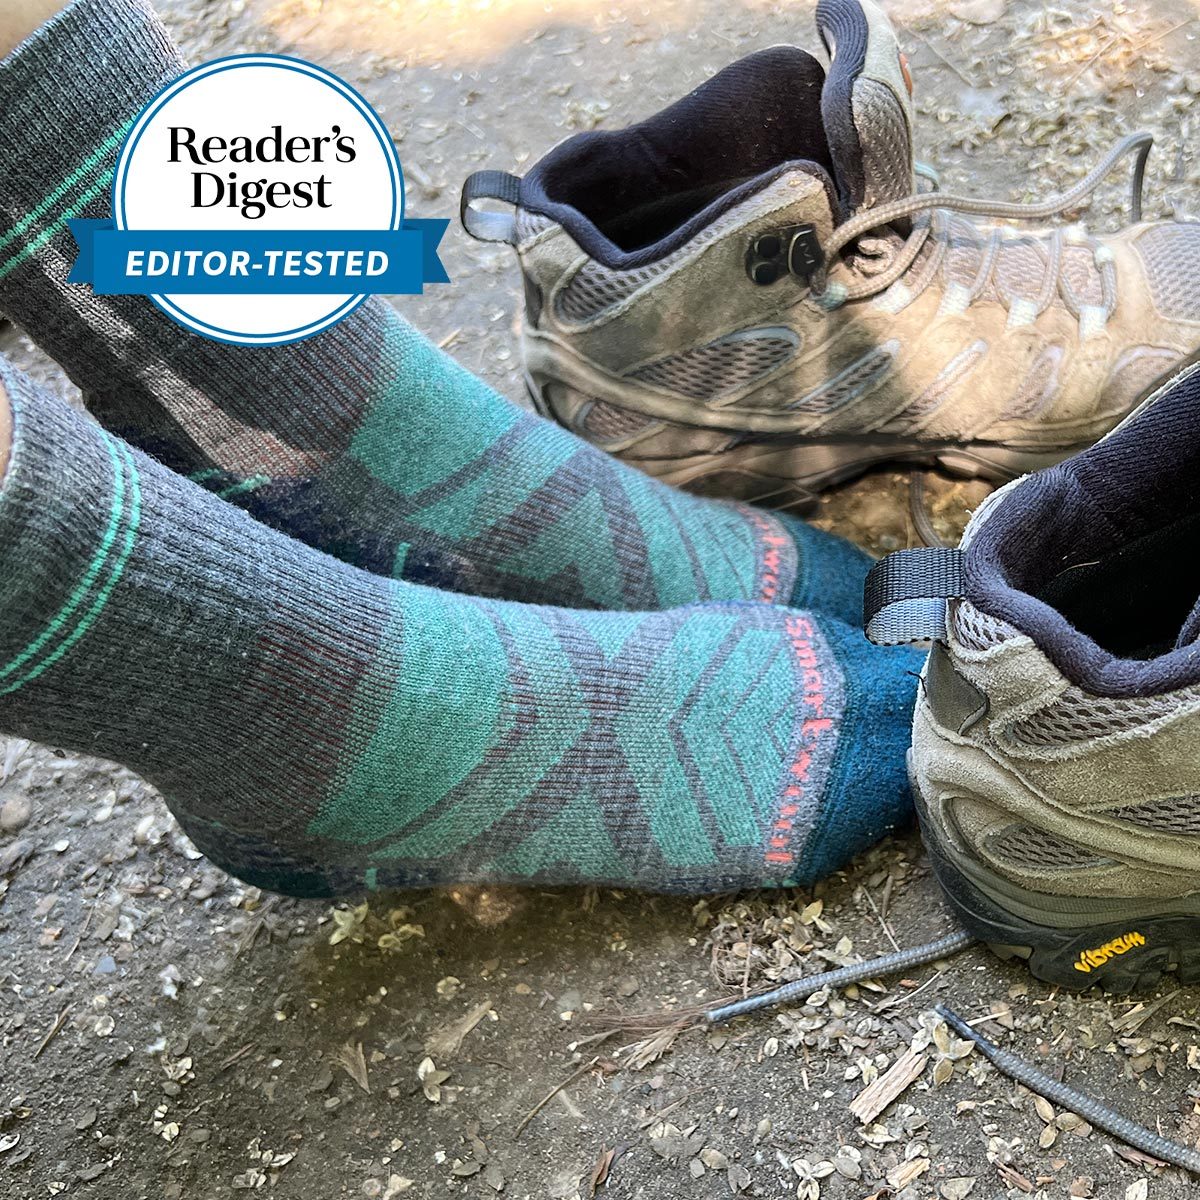 The 6 Best Hiking Socks for Comfortable, Blister-Free Wear All Day